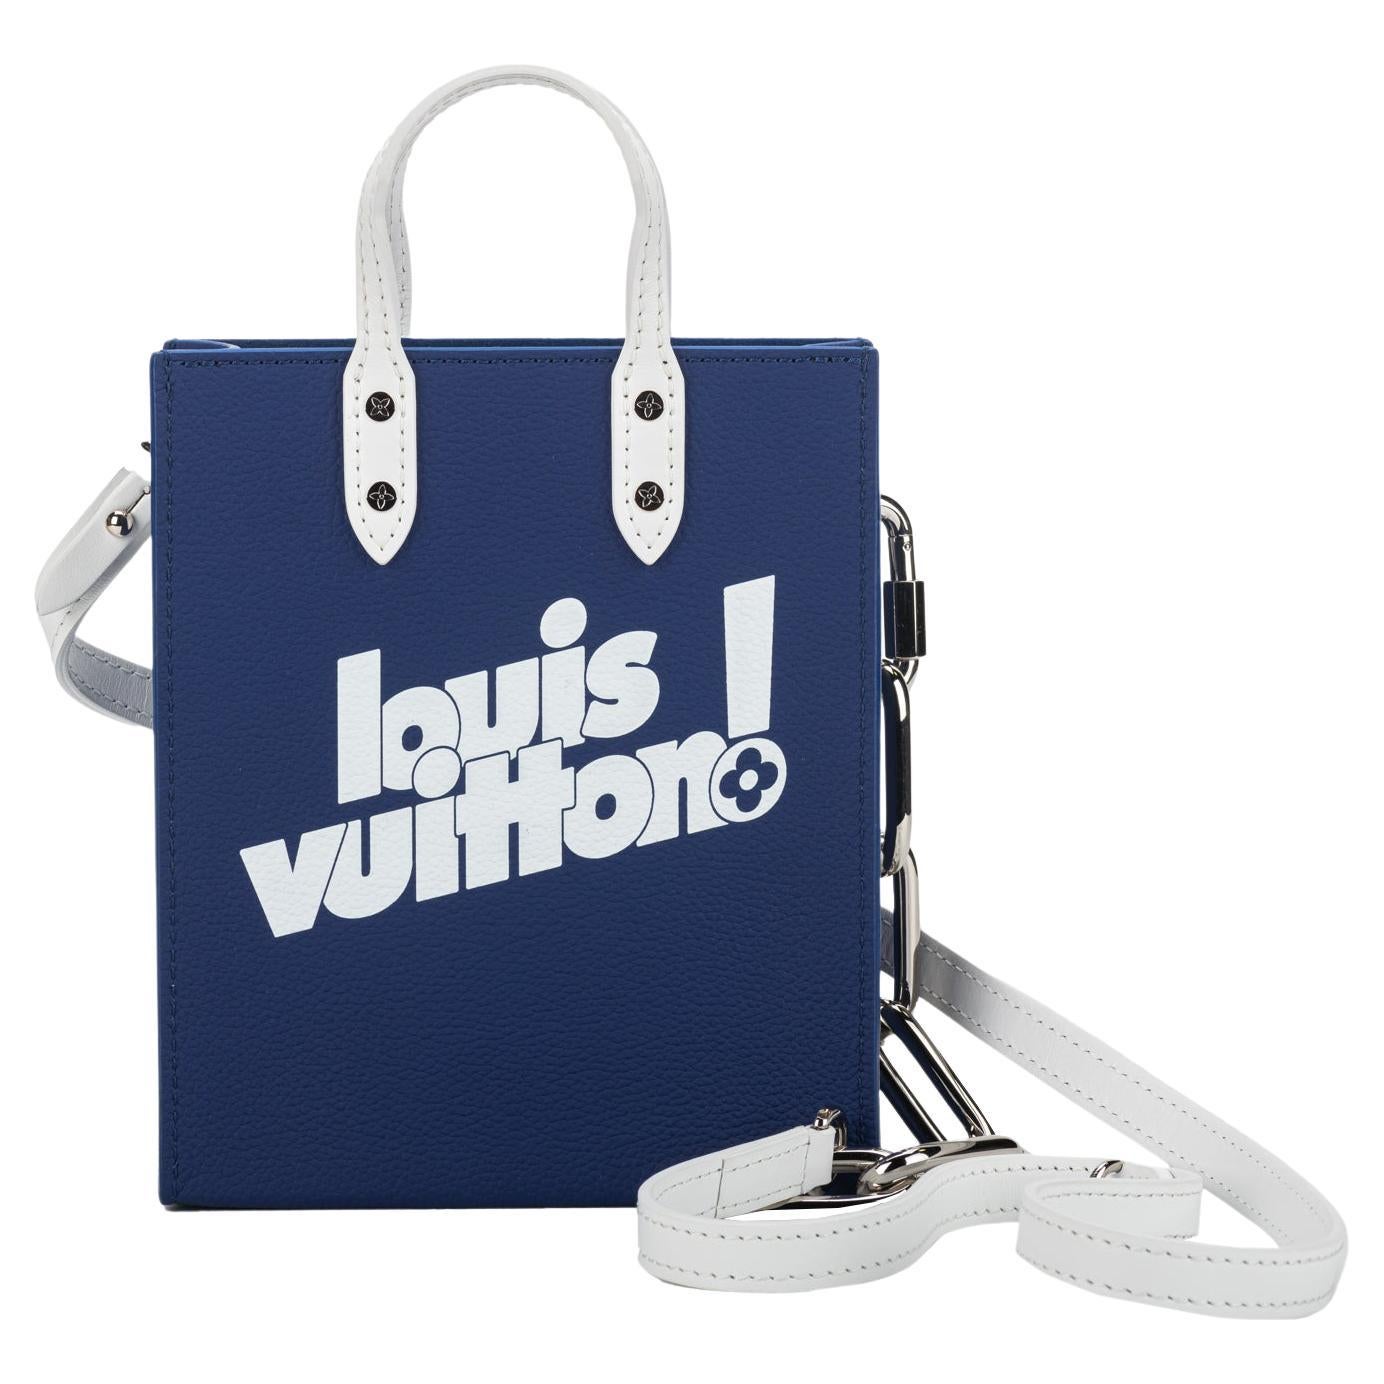 Louis Vuitton Hobo Cruiser PM the Virgil Abloh 'This is Not